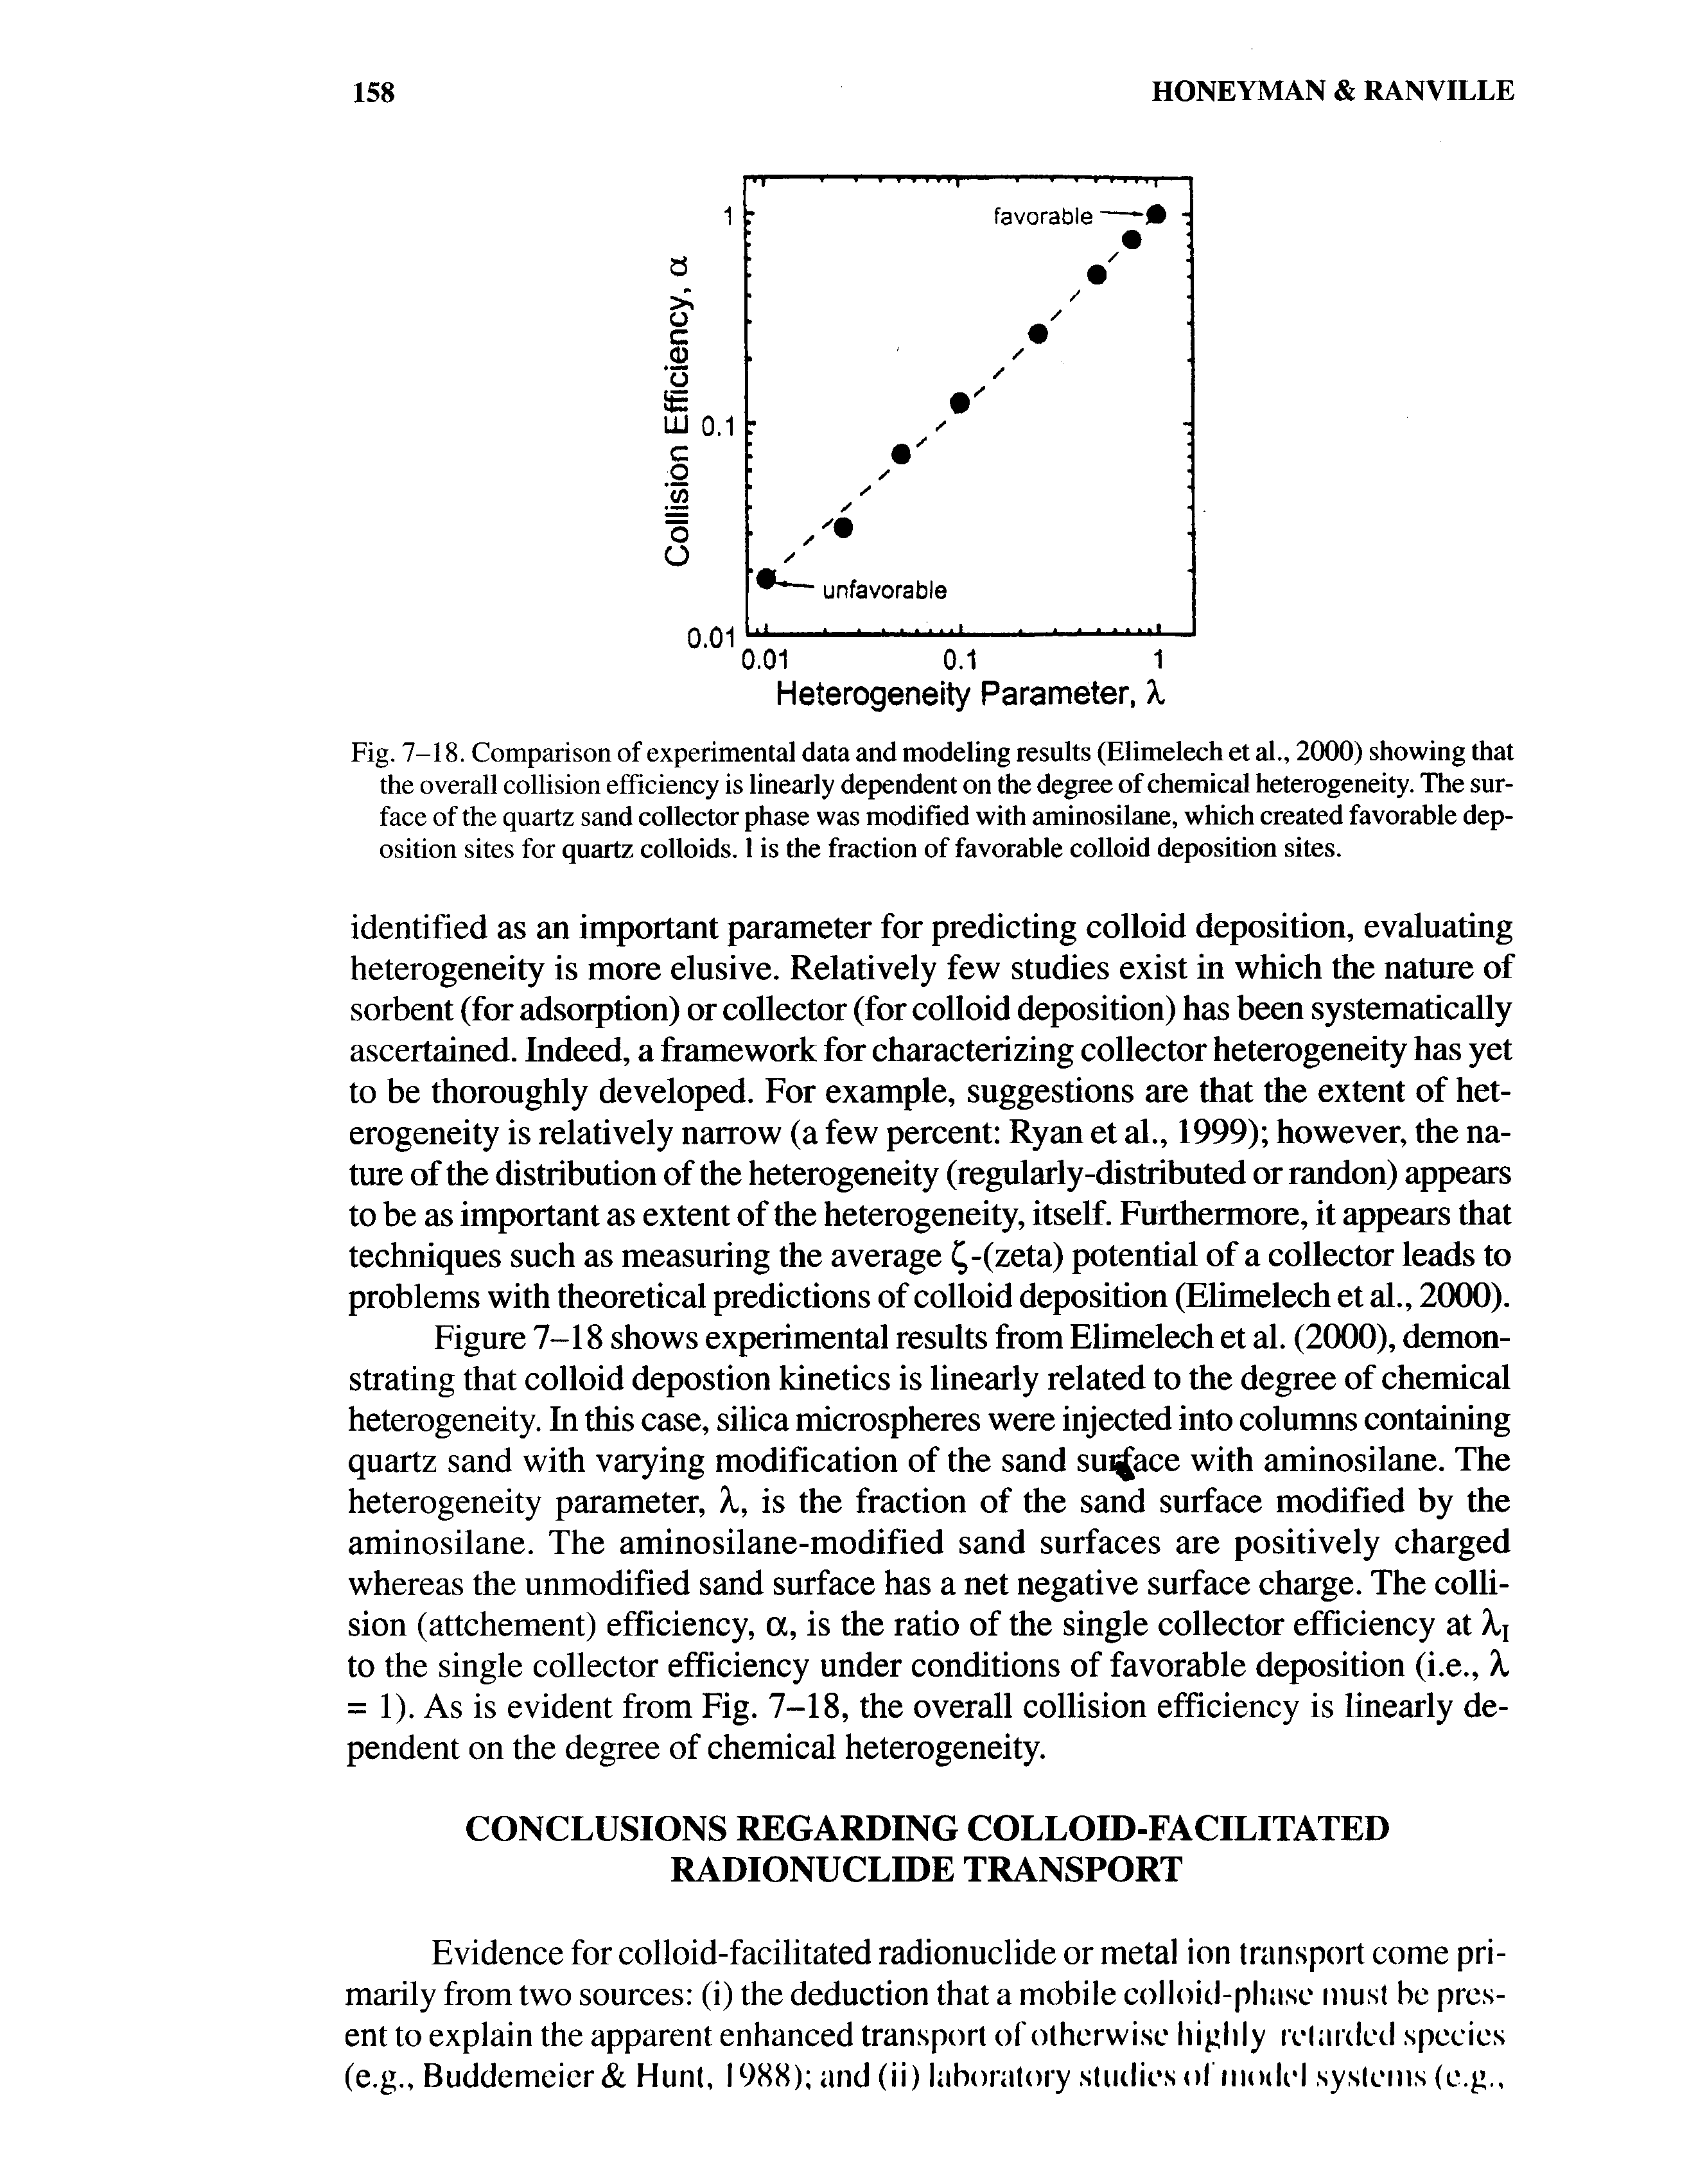 Fig. 7-18. Comparison of experimental data and modeling results (Elimelech et al., 2000) showing that the overall collision efficiency is linearly dependent on the degree of chemical heterogeneity. The surface of the quartz sand collector phase was modified with aminosilane, which created favorable deposition sites for quartz colloids. 1 is the fraction of favorable colloid deposition sites.